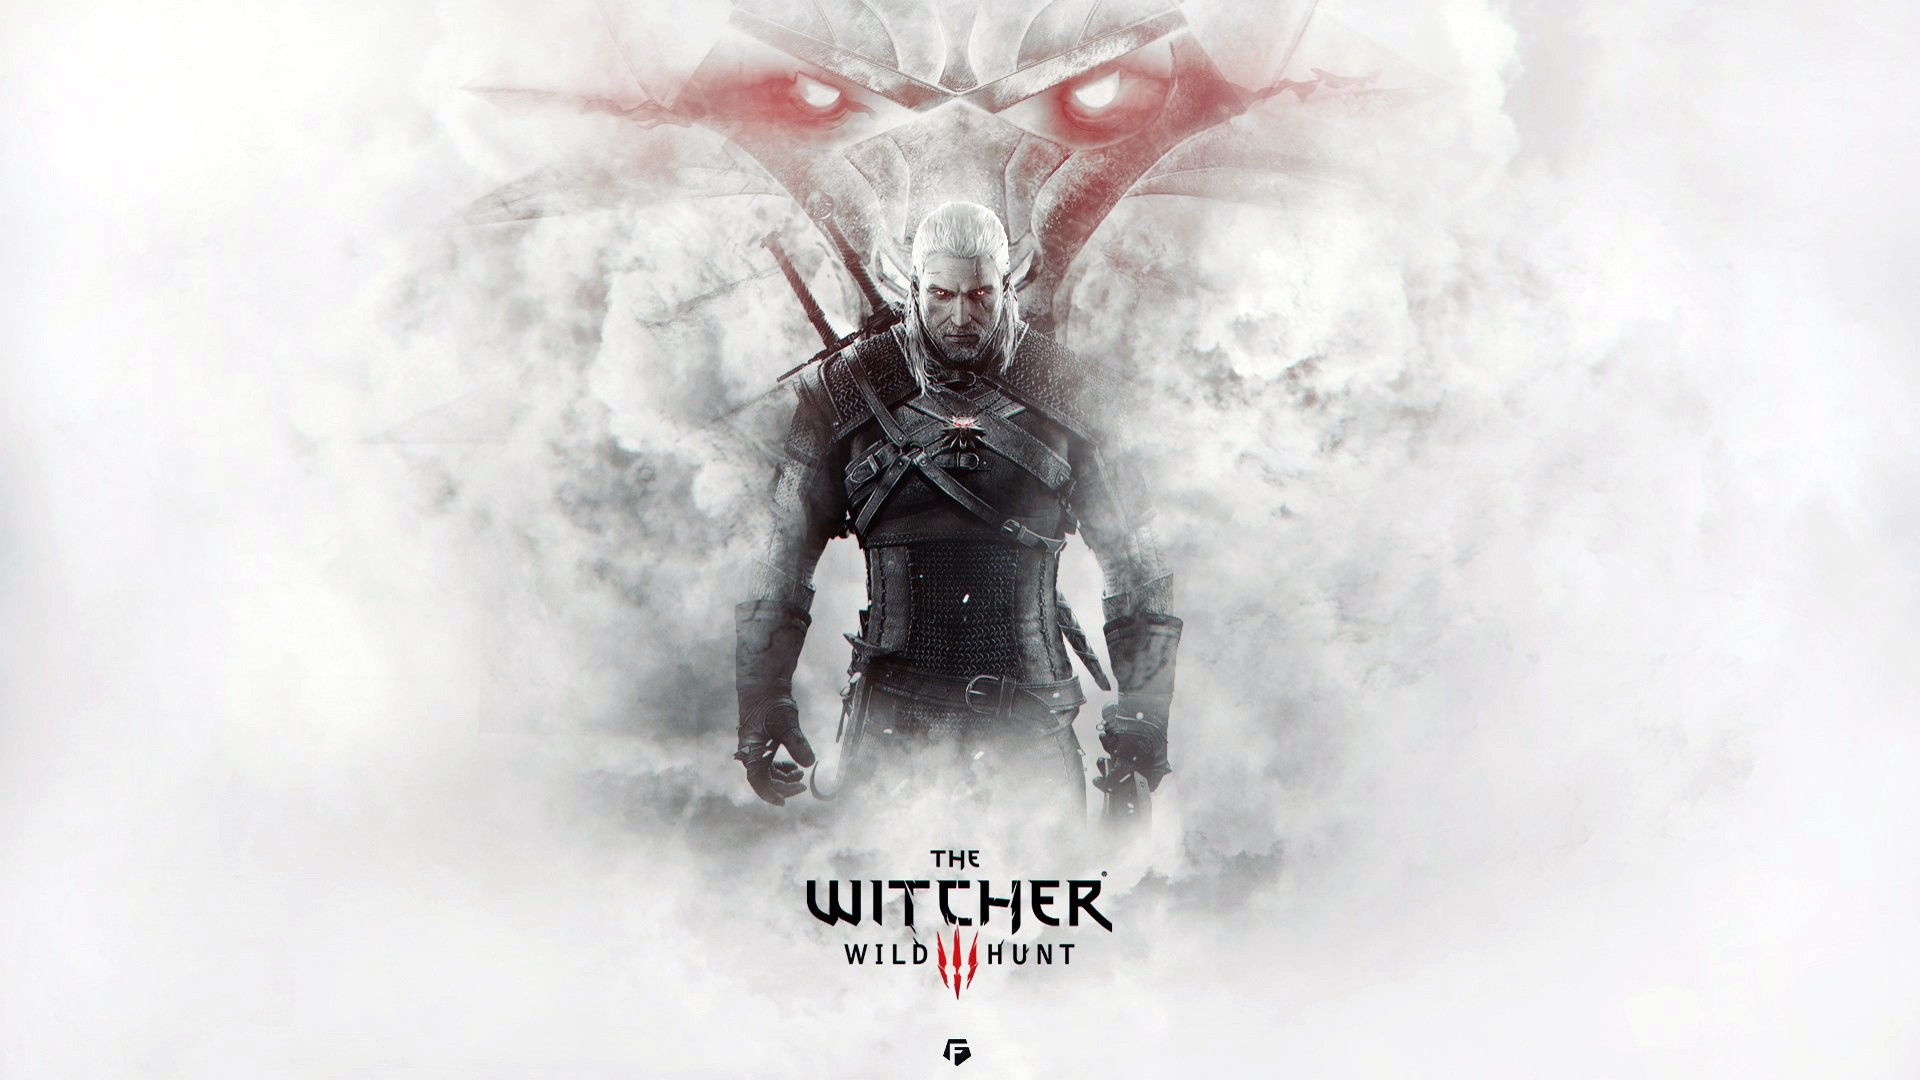 General 1920x1080 The Witcher 3: Wild Hunt The Witcher video games RPG PC gaming video game men video game characters fantasy men